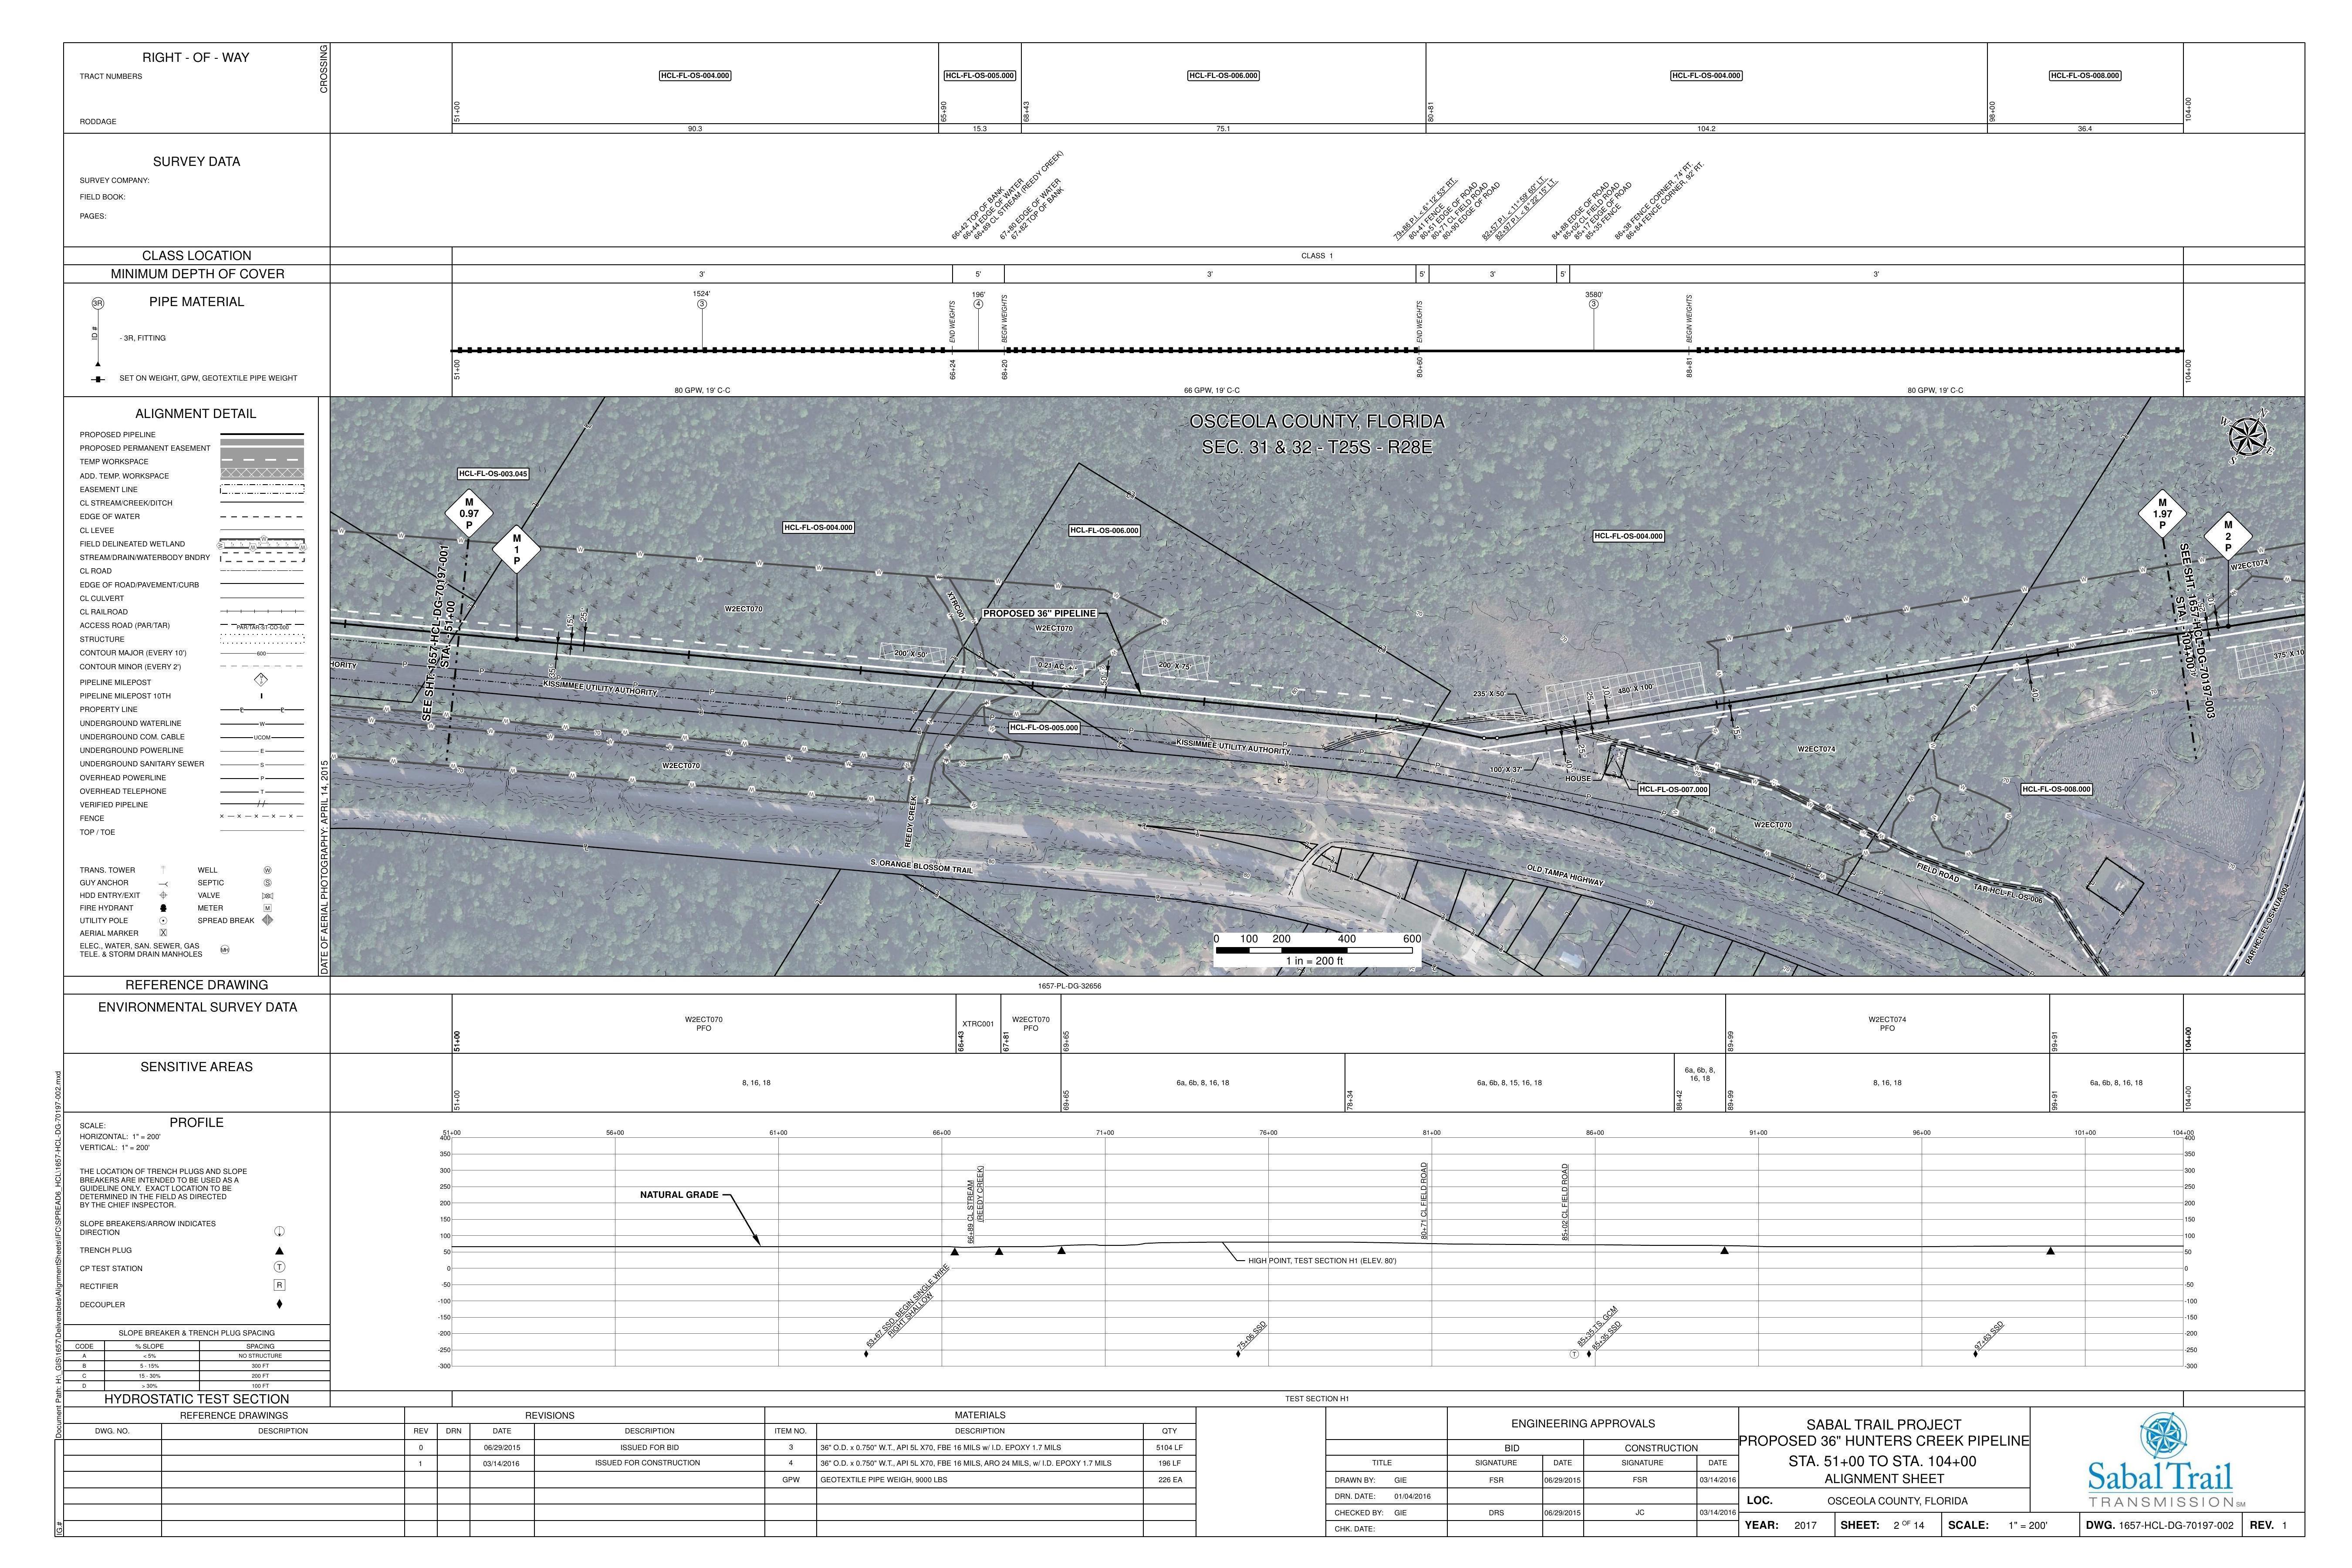 1657-HCL-DG-70197-002, STA. 51+00 TO STA. 104+00, MP 1.97, (REEDY CREEK), US-17, Old Tampa Highway, PROPOSED 36-inch HUNTERS CREEK PIPELINE, OSCEOLA COUNTY, FLORIDA, 28.265039, -81.536845